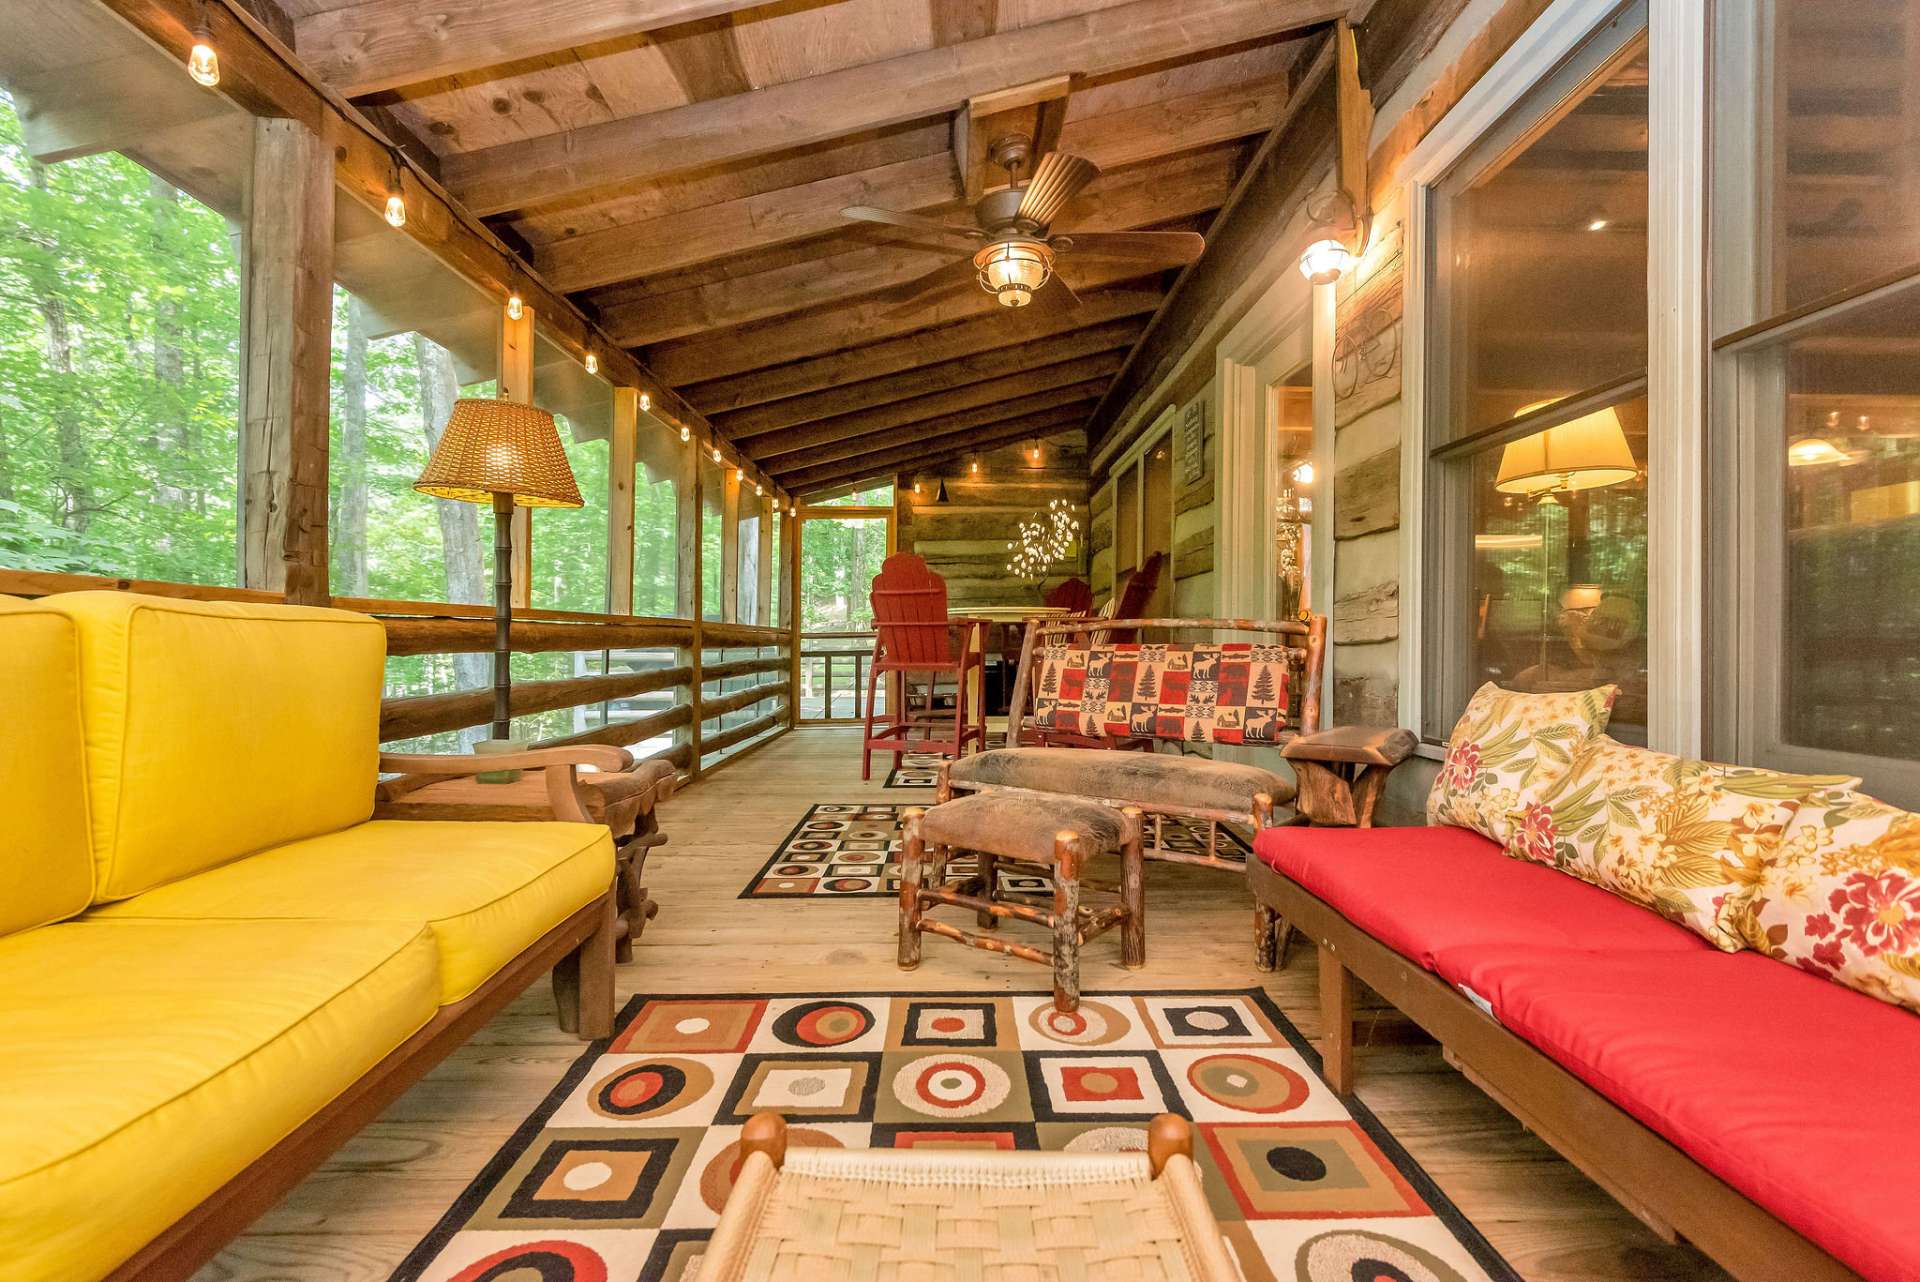 The porch is screened to enjoy cool breezes without pesky insects crashing your party.